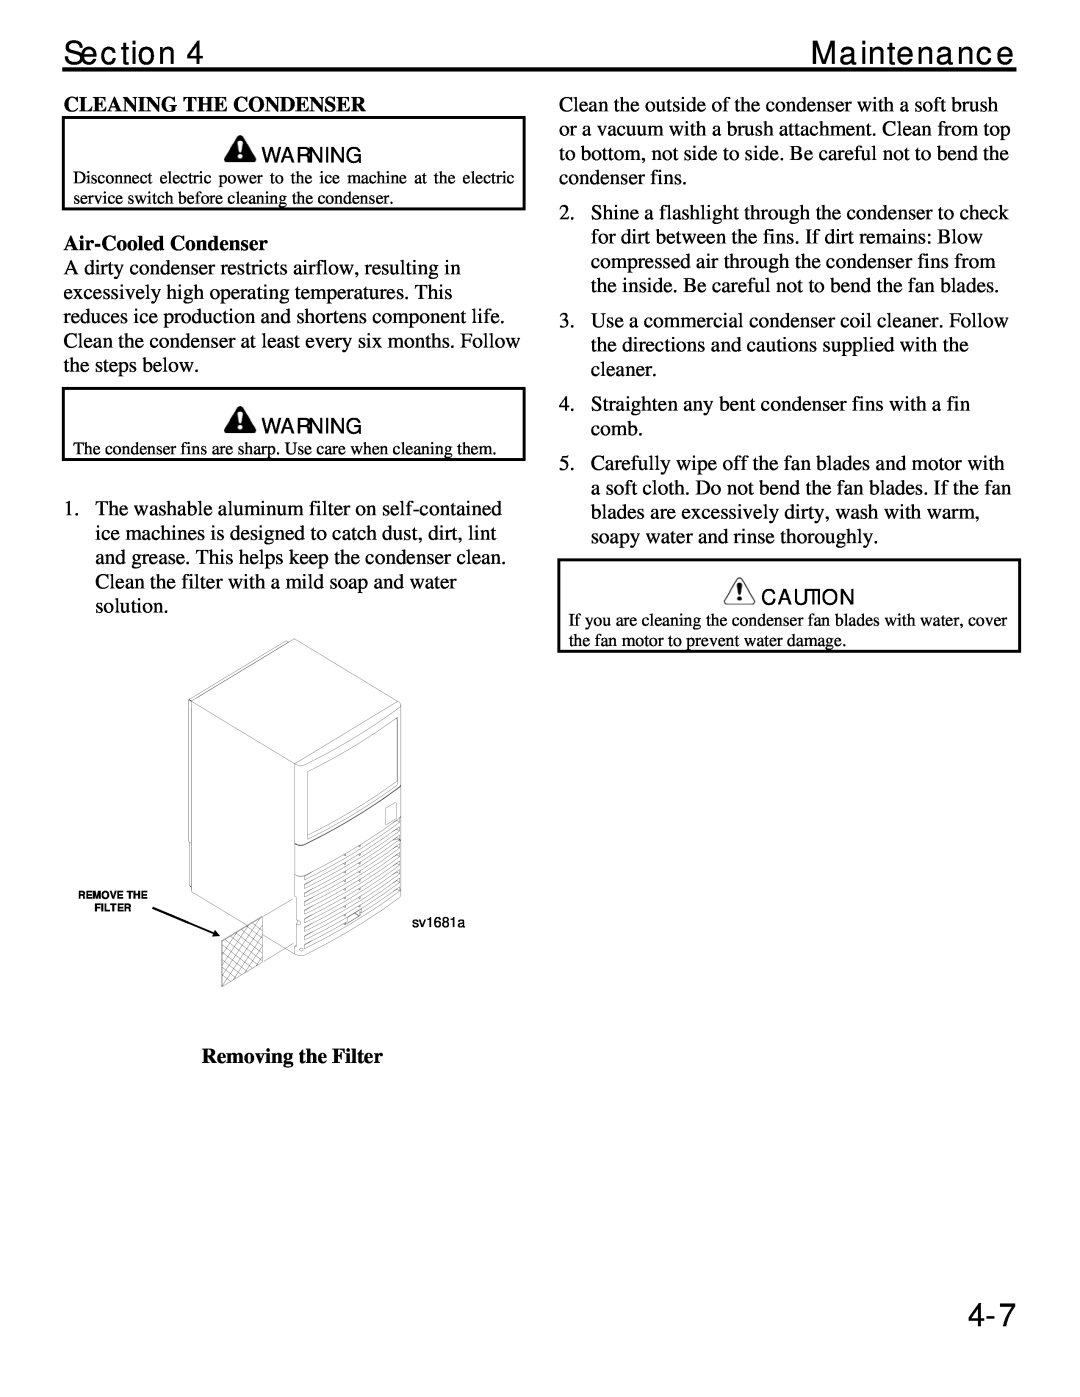 Manitowoc Ice QM20 service manual Cleaning The Condenser, Air-Cooled Condenser, Removing the Filter, Section, Maintenance 